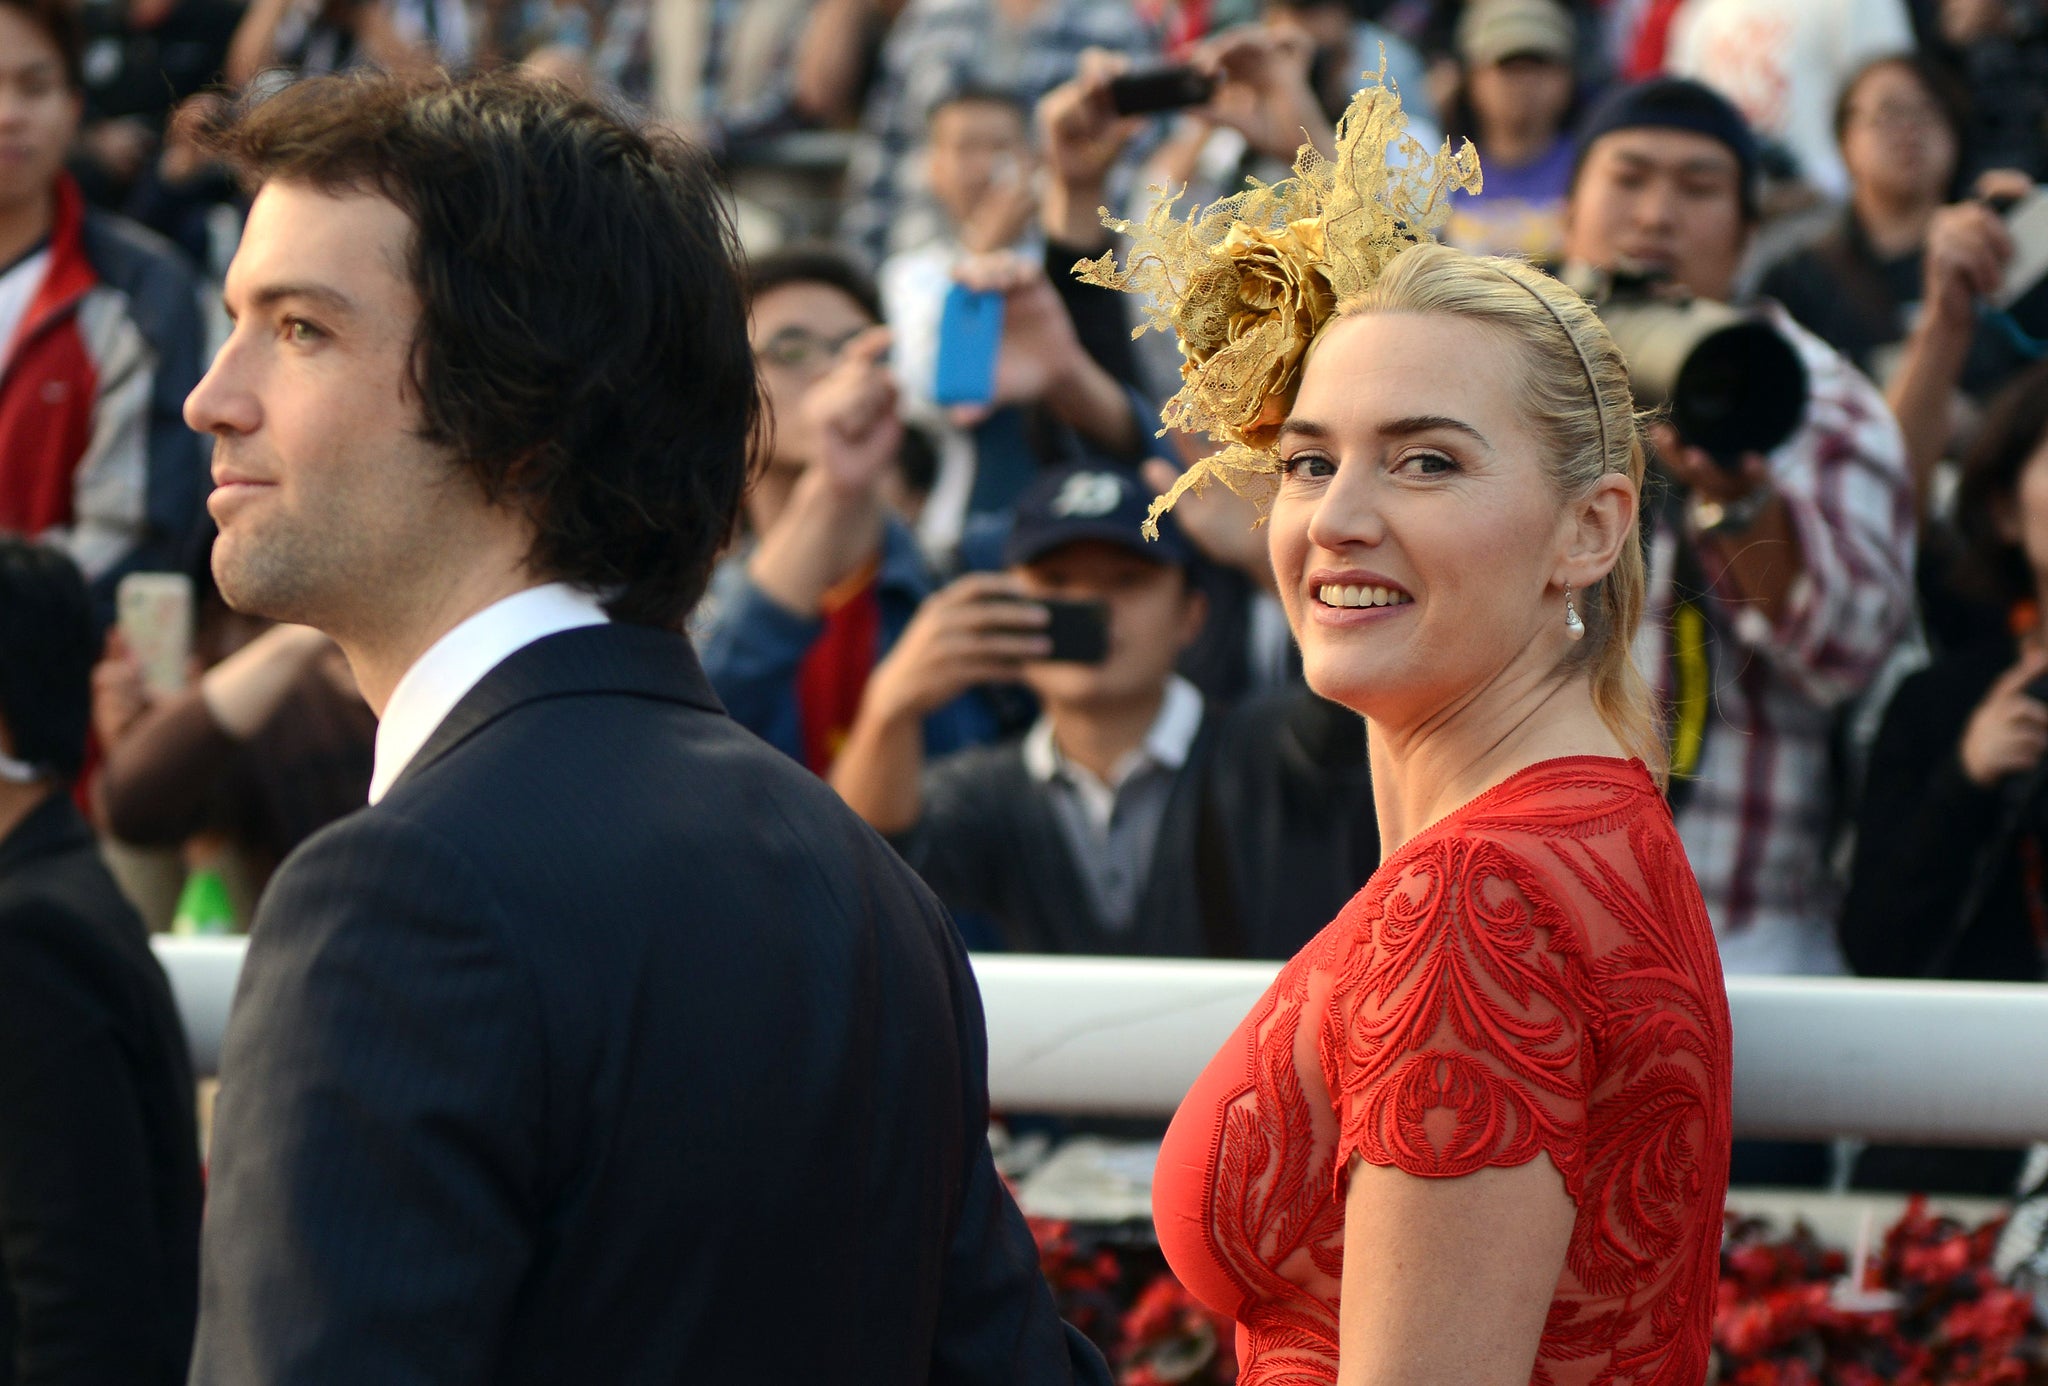 Ned RocknRoll and Kate Winslet married in December 2012